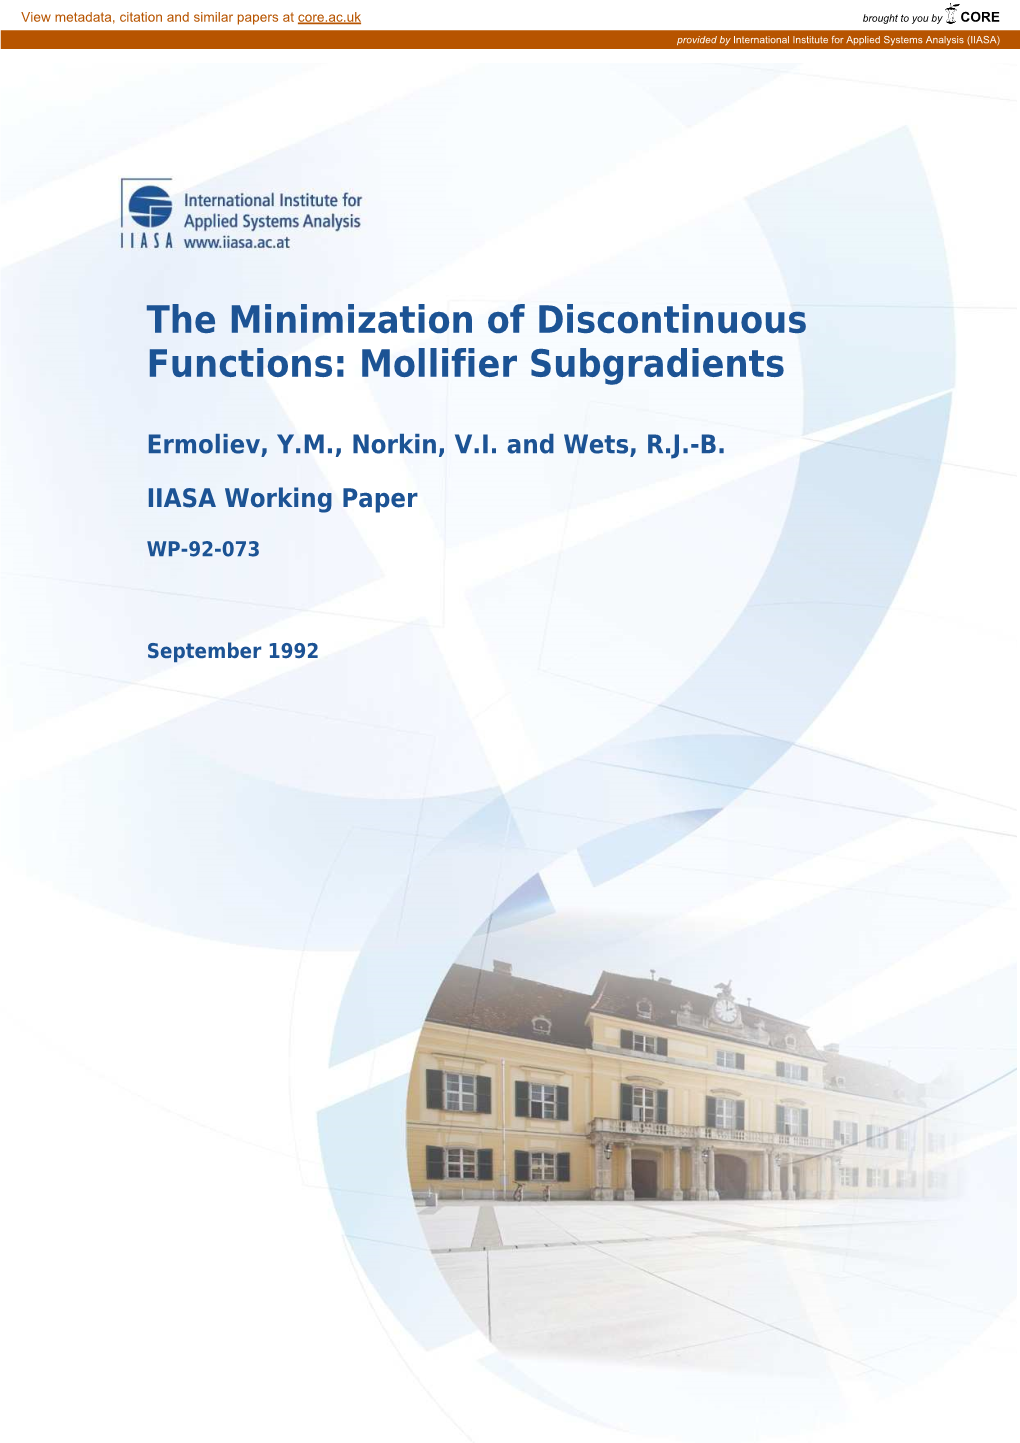 The Minimization of Discontinuous Functions: Mollifier Subgradients